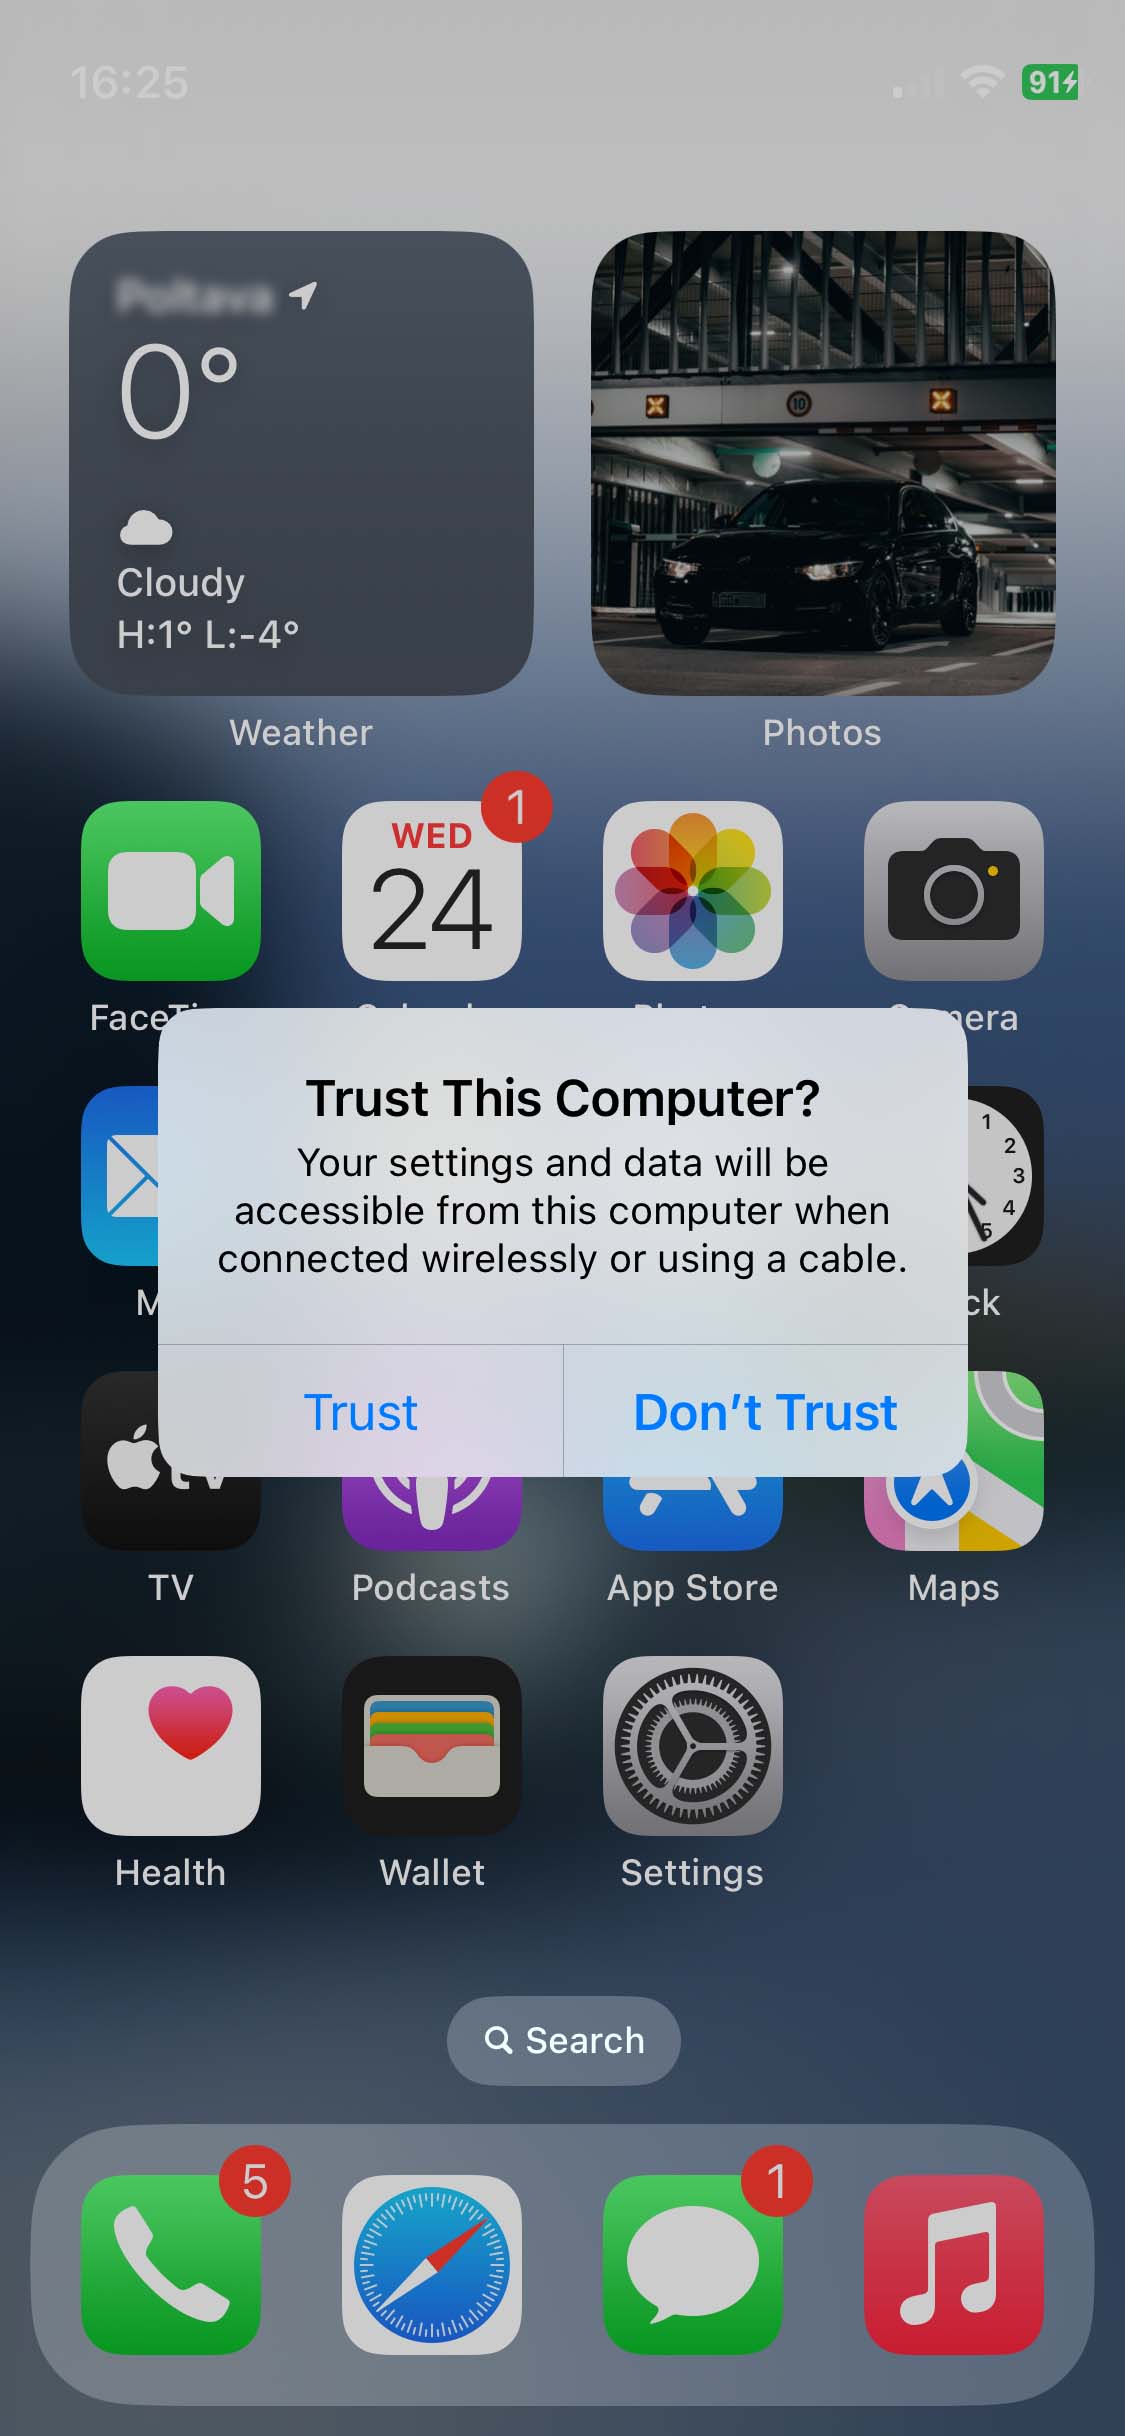 Trust this computer message on iPhone